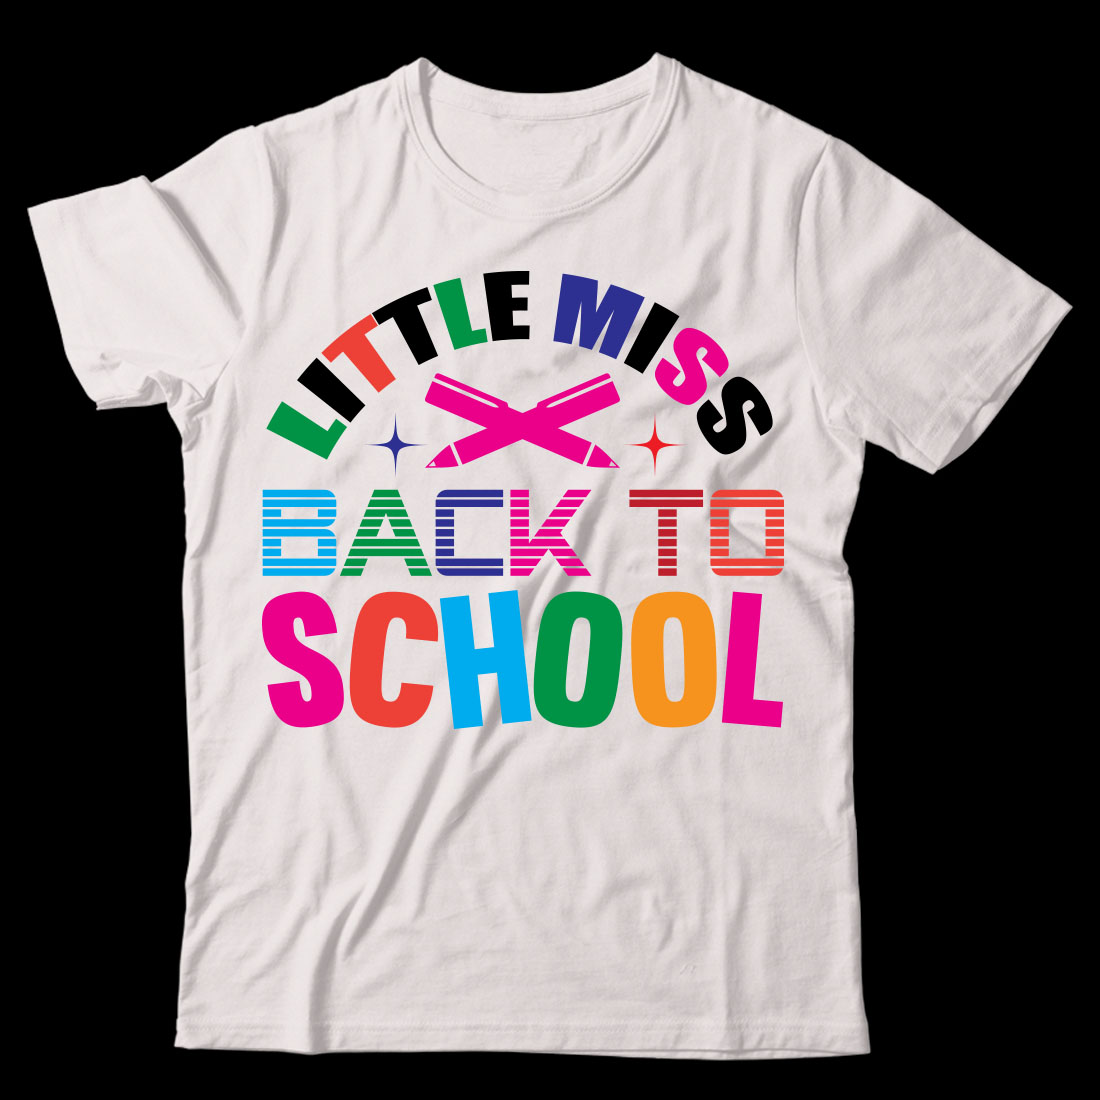 White t - shirt that says little miss back to school.